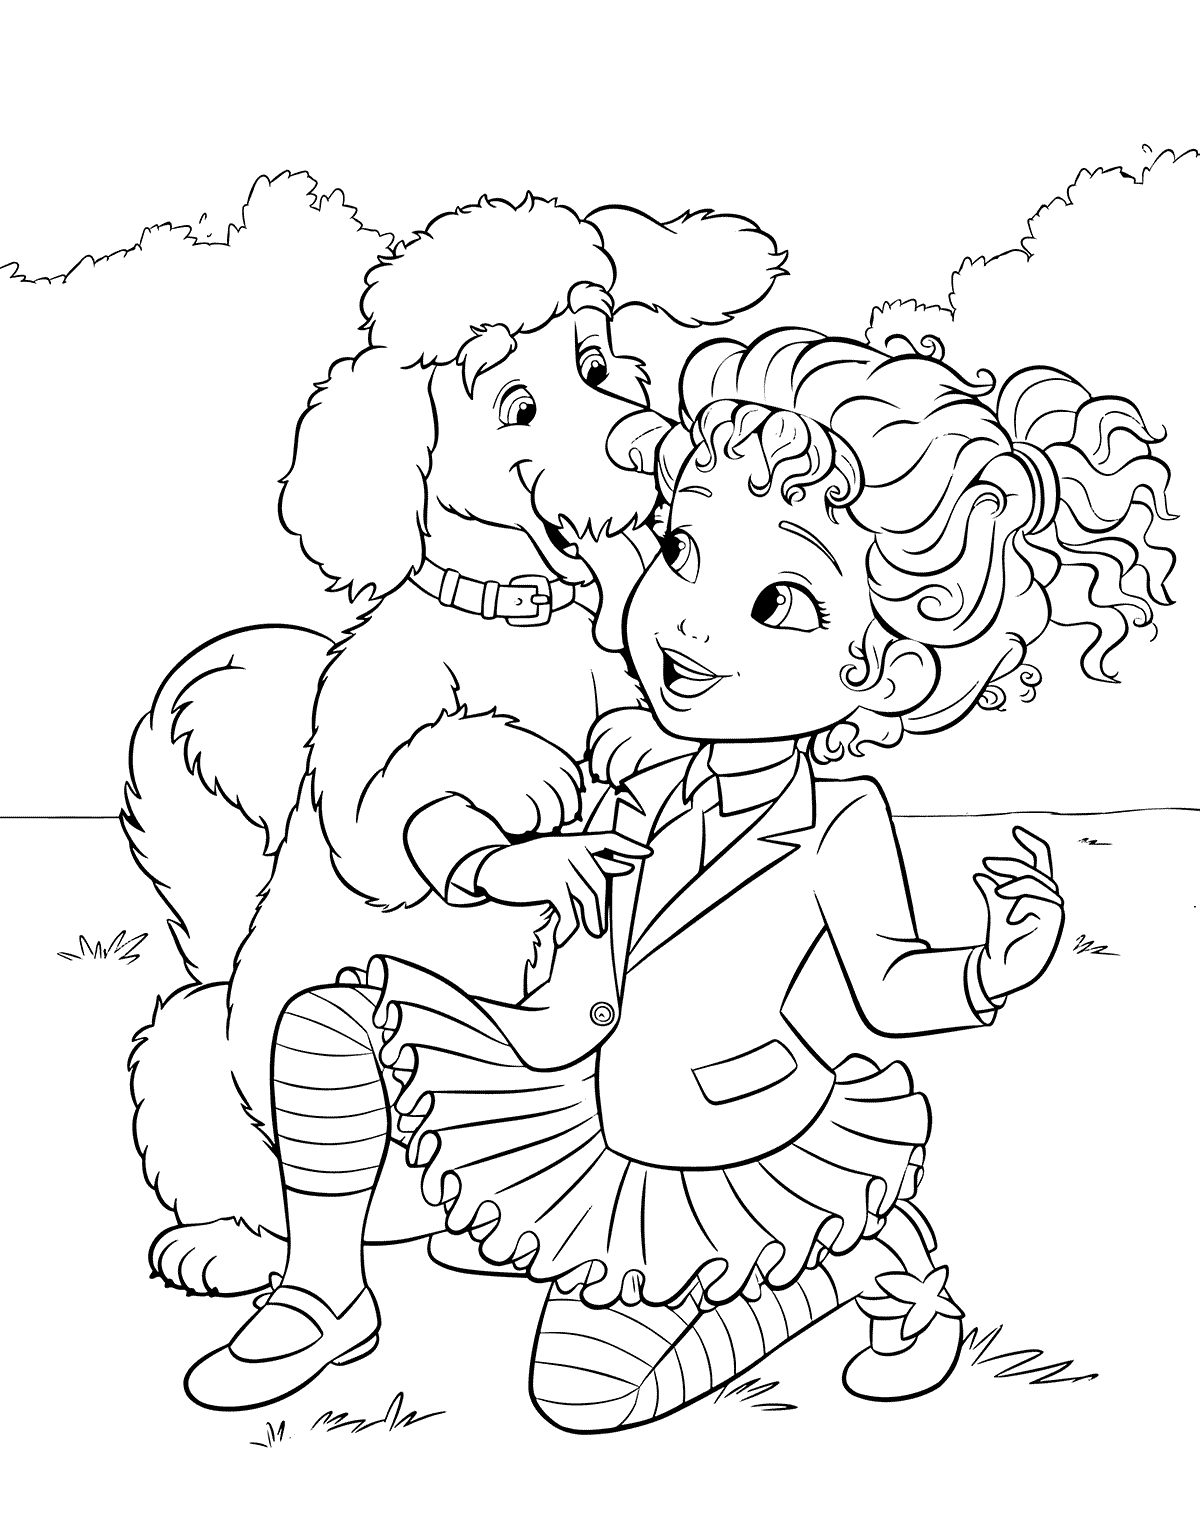 Poodle Coloring Pages - Best Coloring Pages For Kids